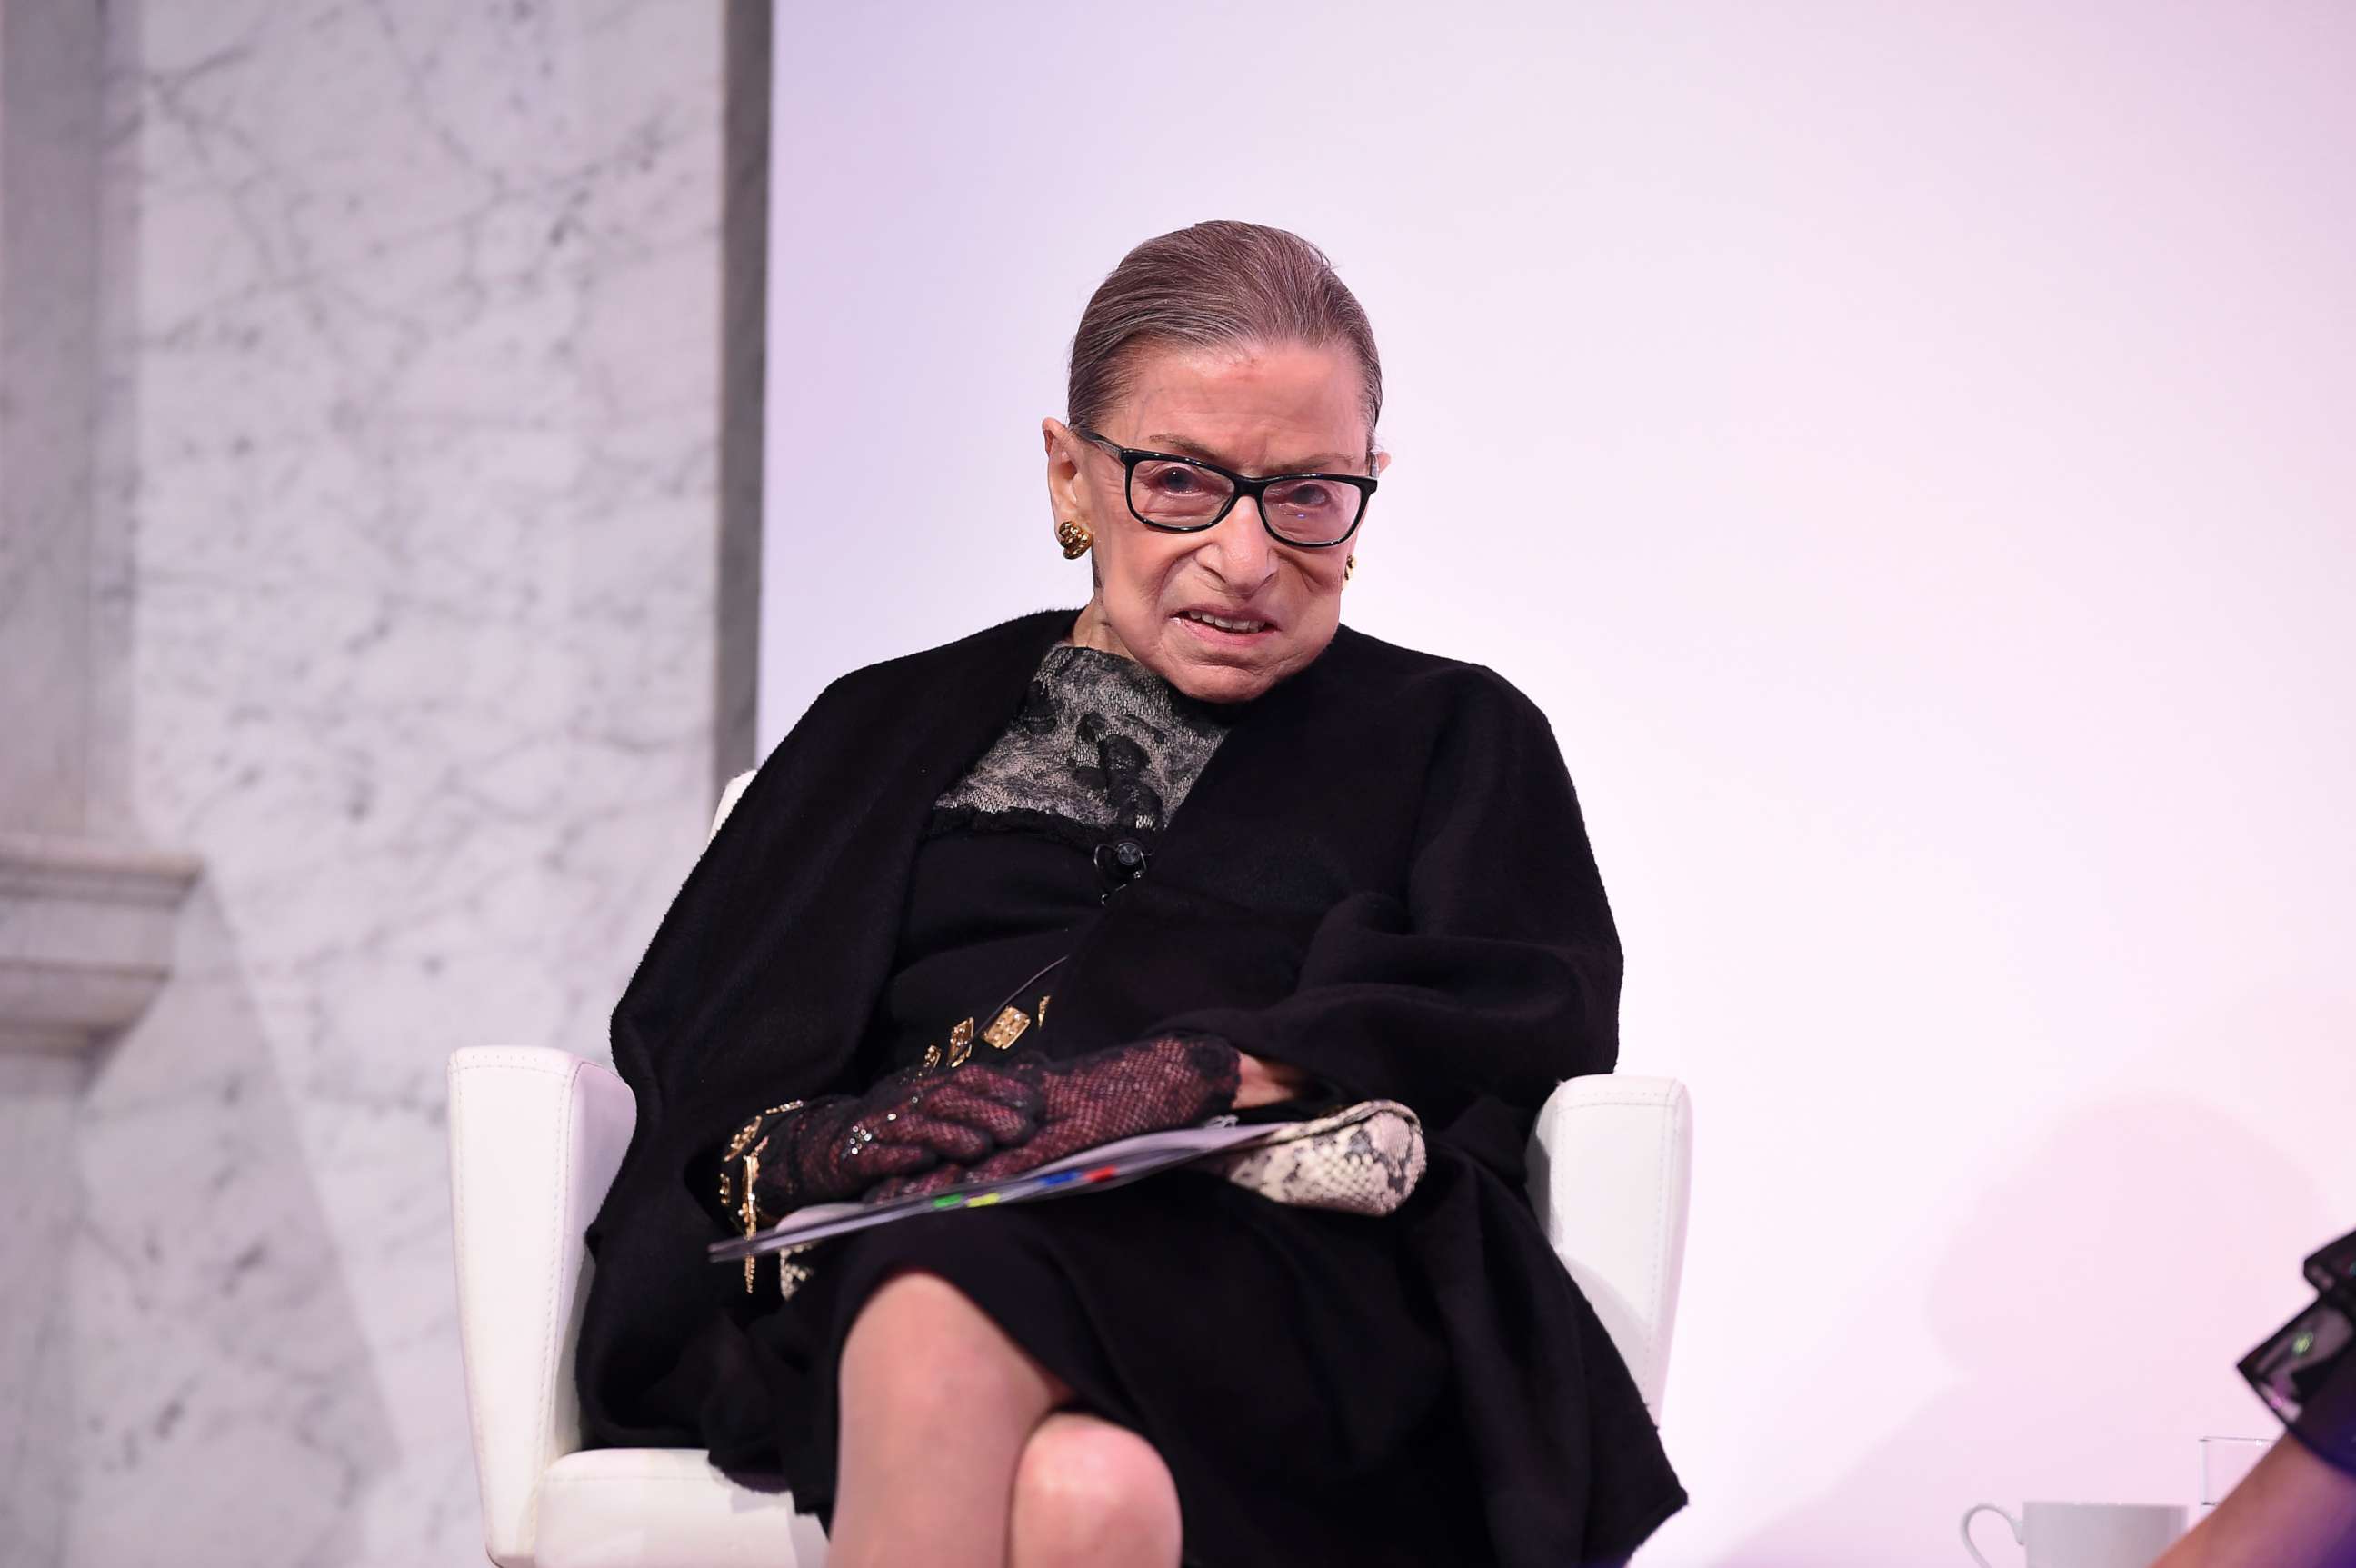 PHOTO: Supreme Court Justice Ruth Bader Ginsburg attends an event, Feb. 19, 2020 in Washington.